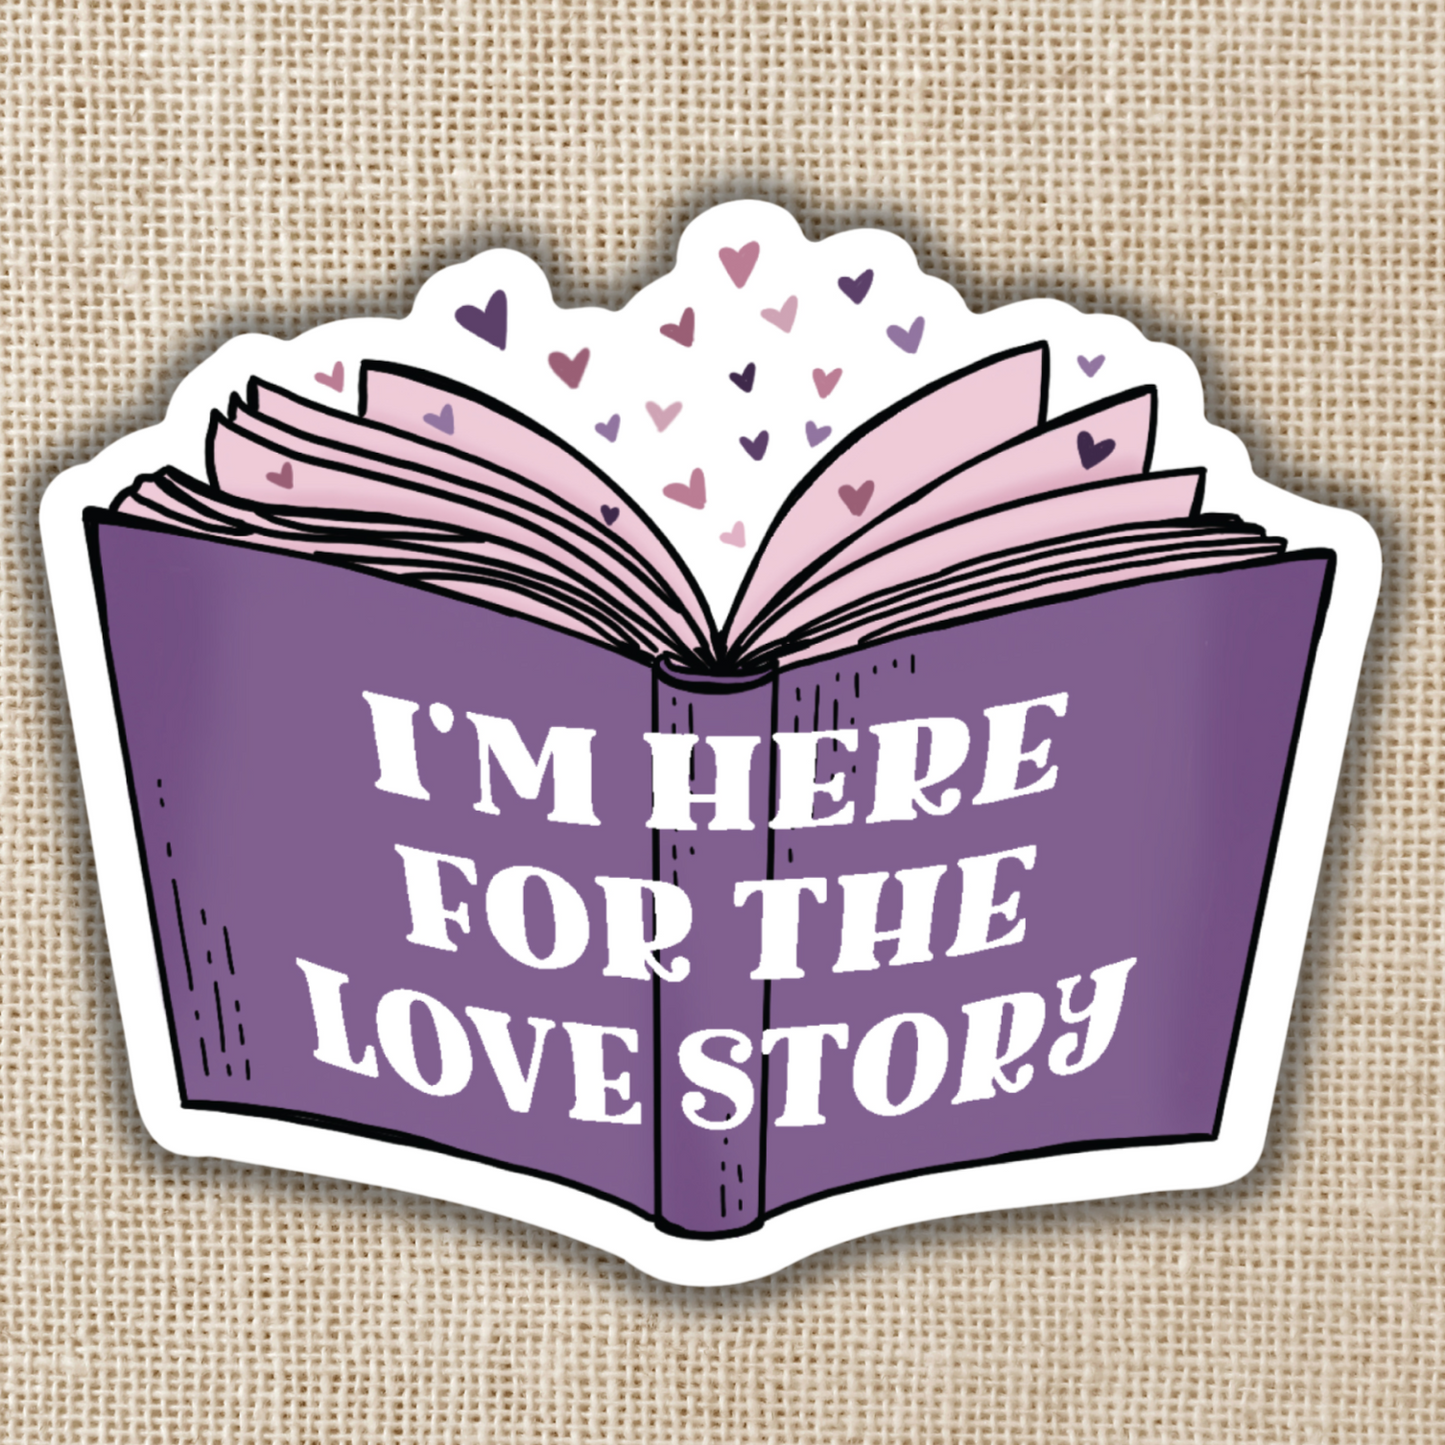 Here For The Love Story Sticker